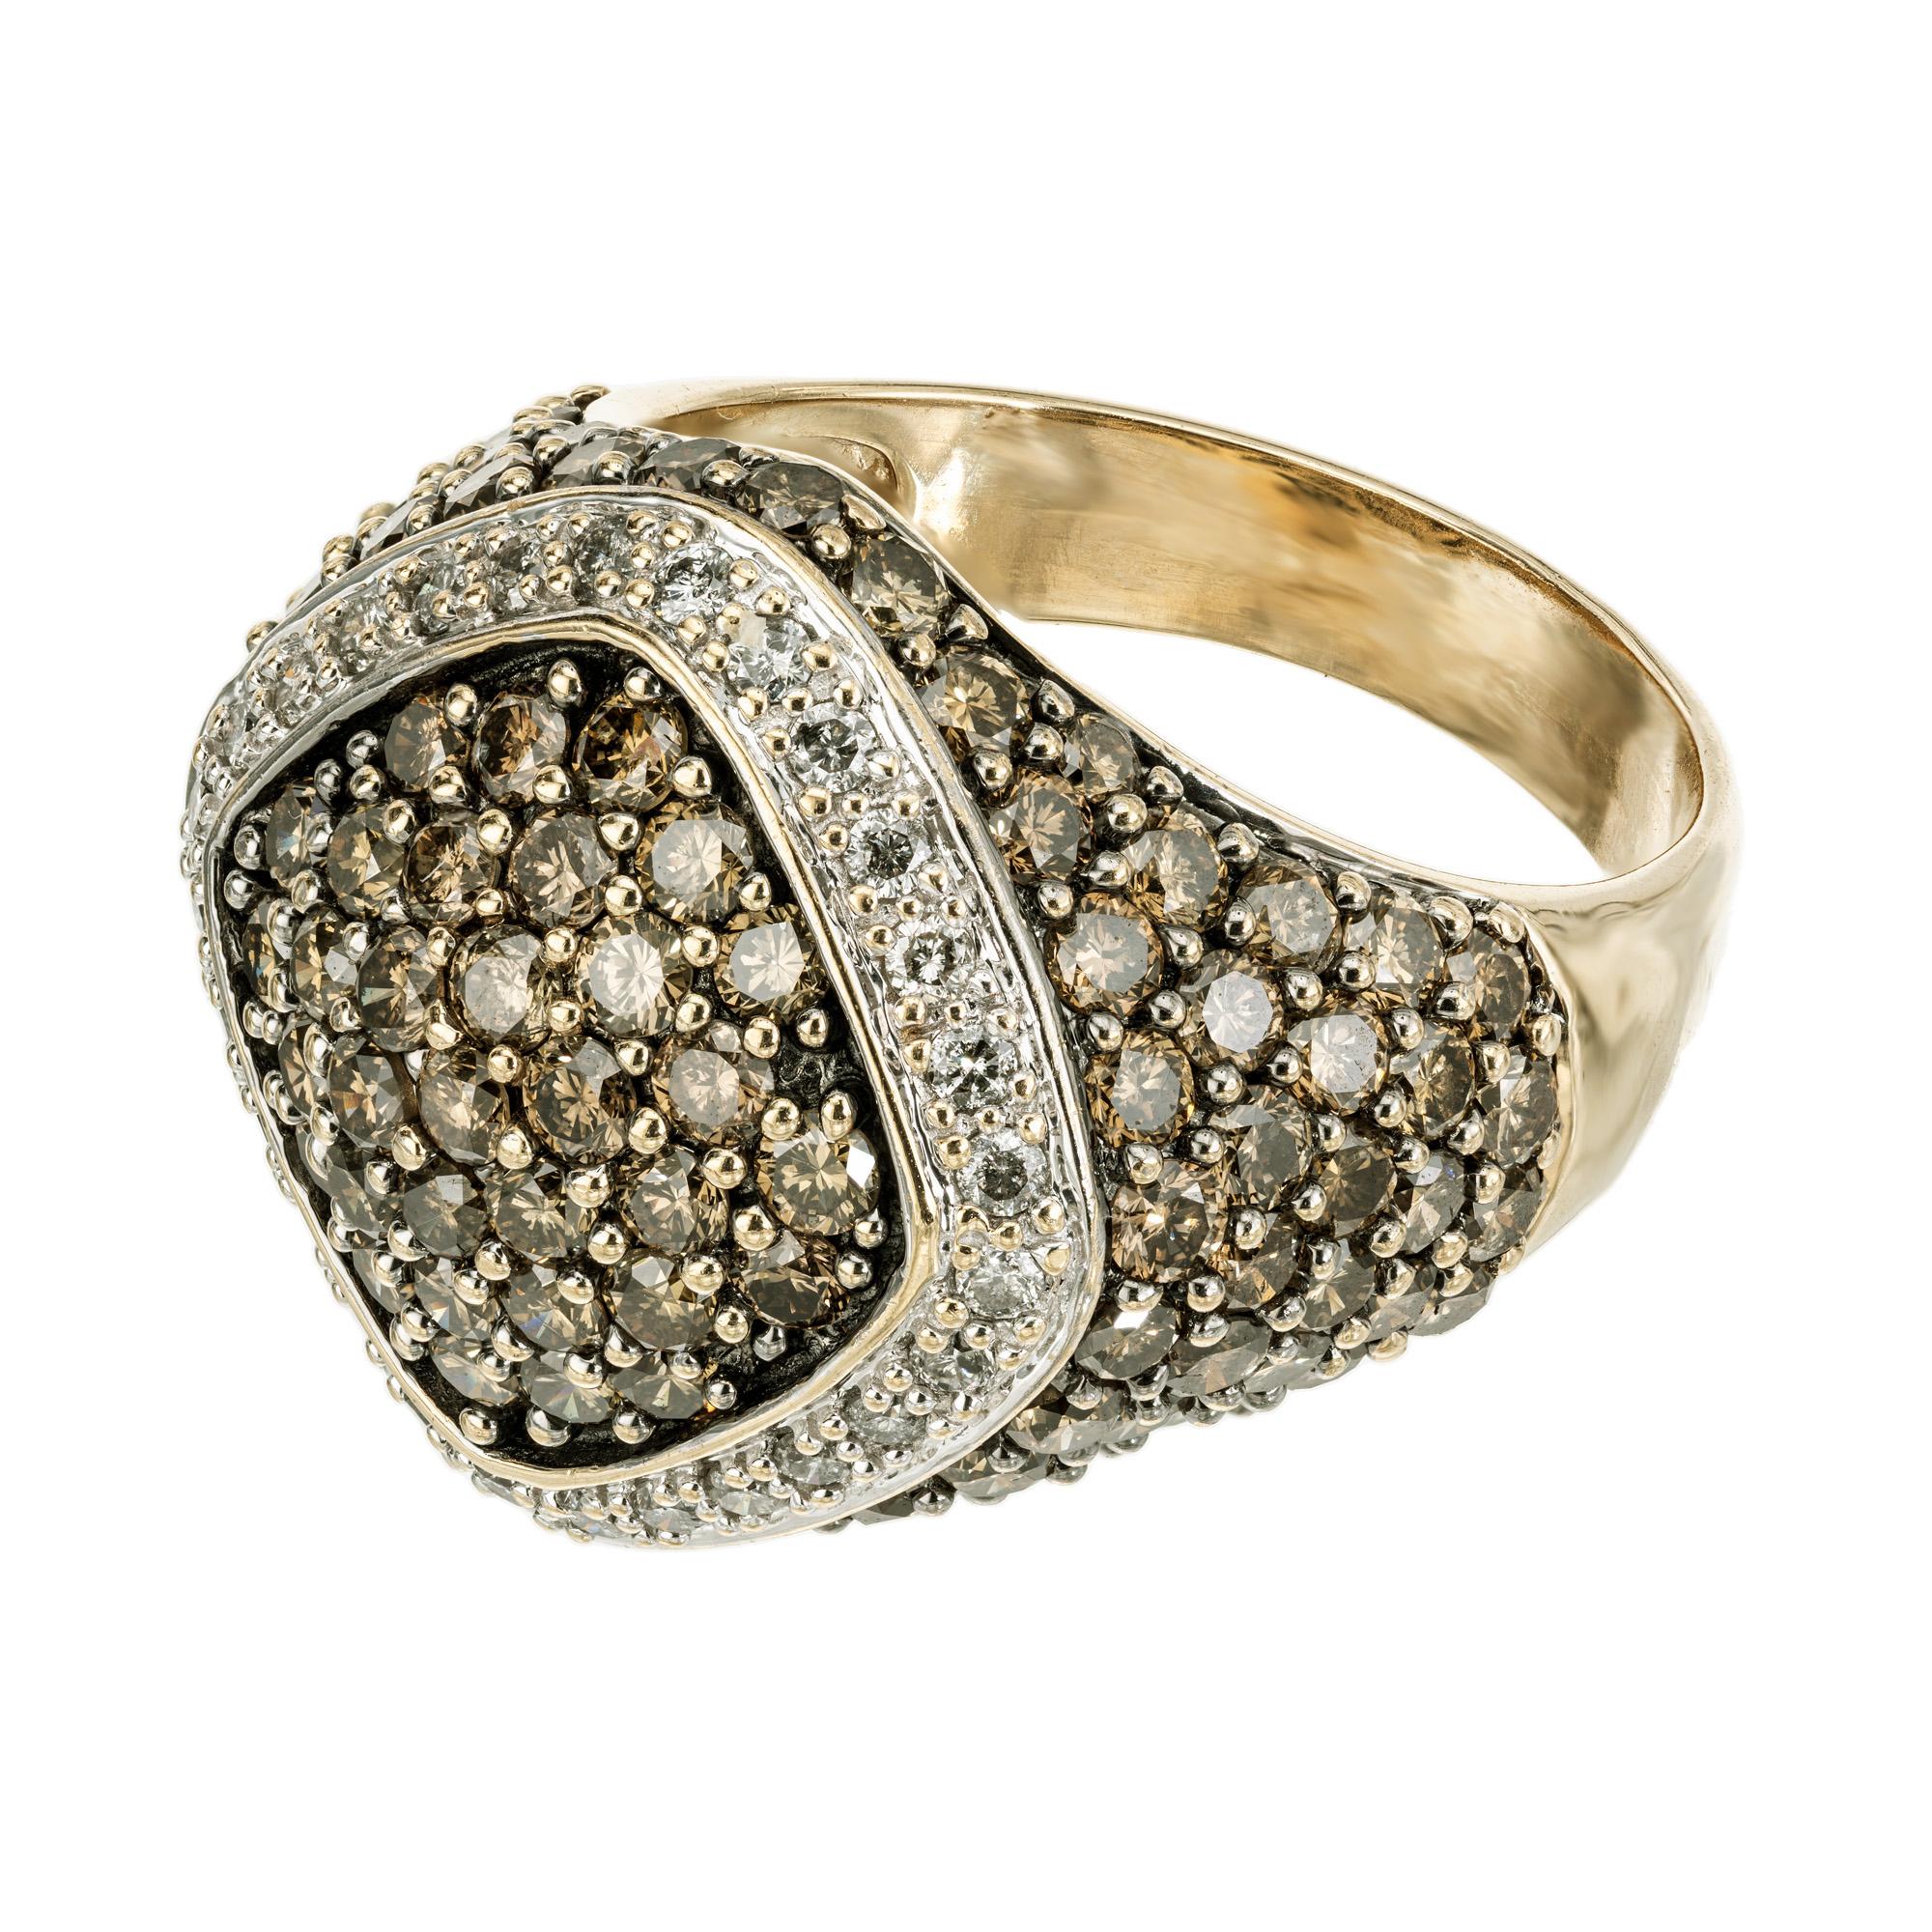 Beautiful Golden rich brown white diamond dome cocktail Ring. This spectacular cluster ring is adorned with 105 natural chocolate round diamonds totaling approximately 2.00kcts.  along the domed top and shoulders. There is a halo of 30 round full